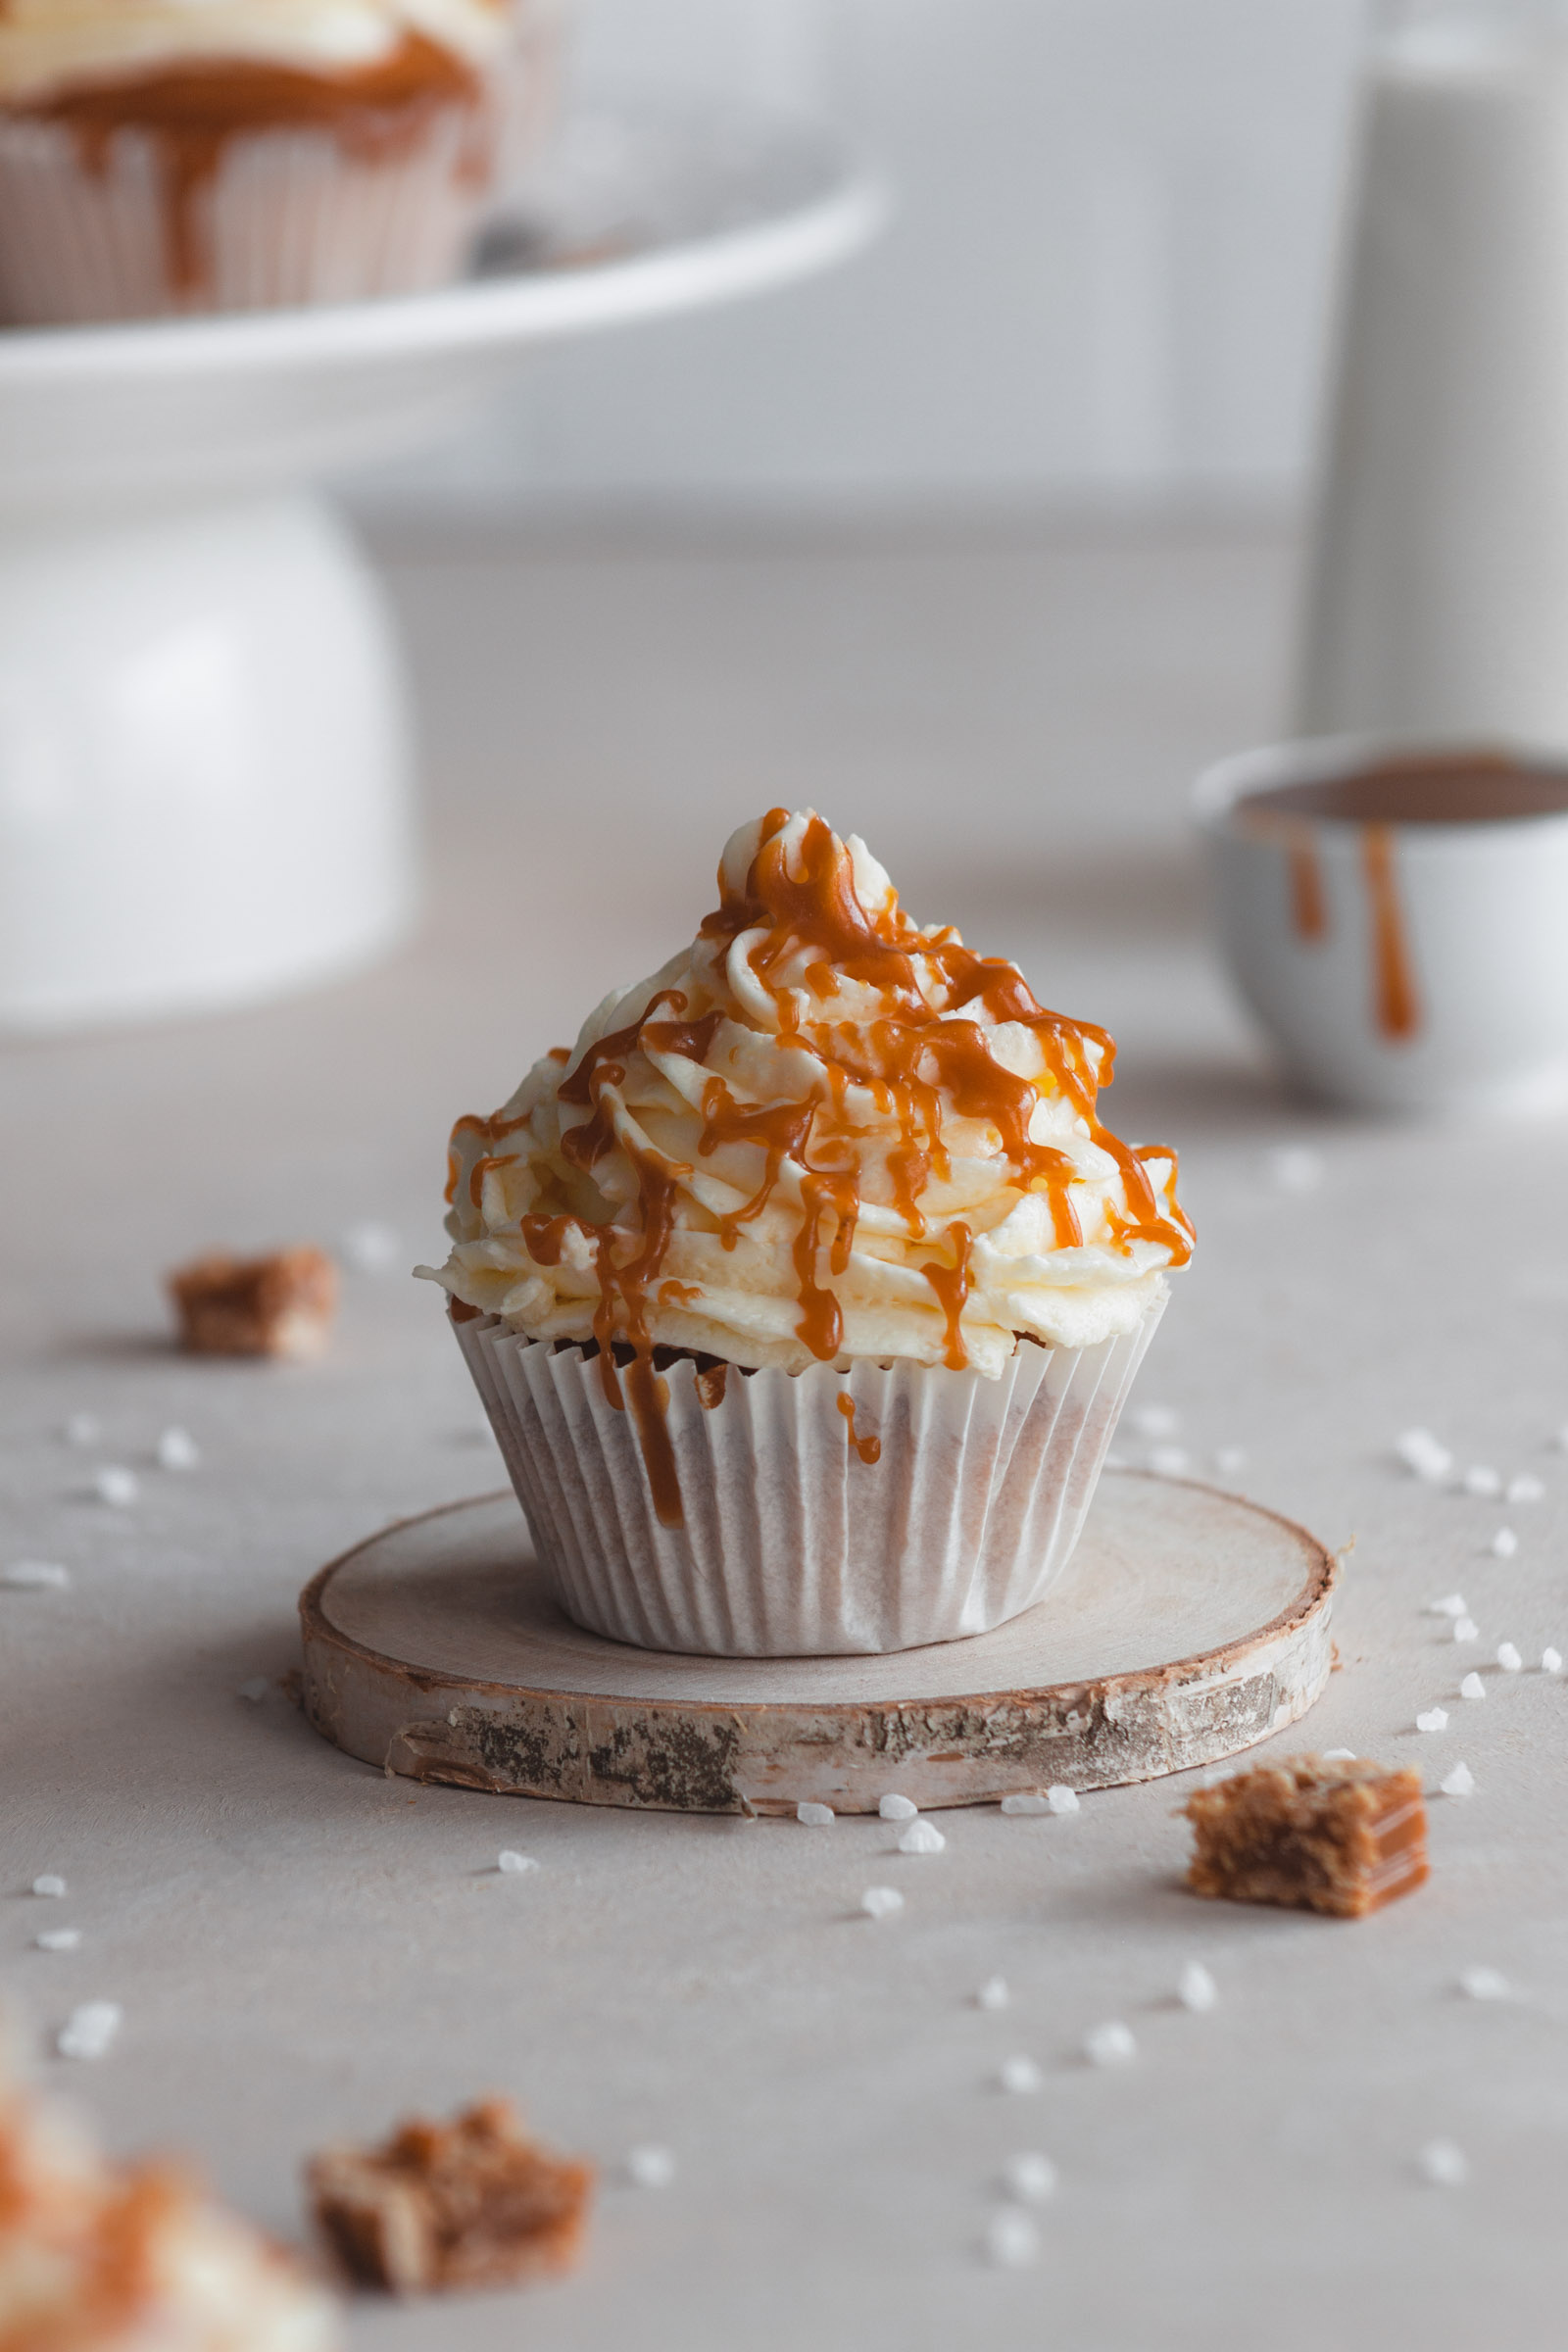 You are currently viewing The Quickest Salted Caramel Cupcakes with Cream Cheese Frosting